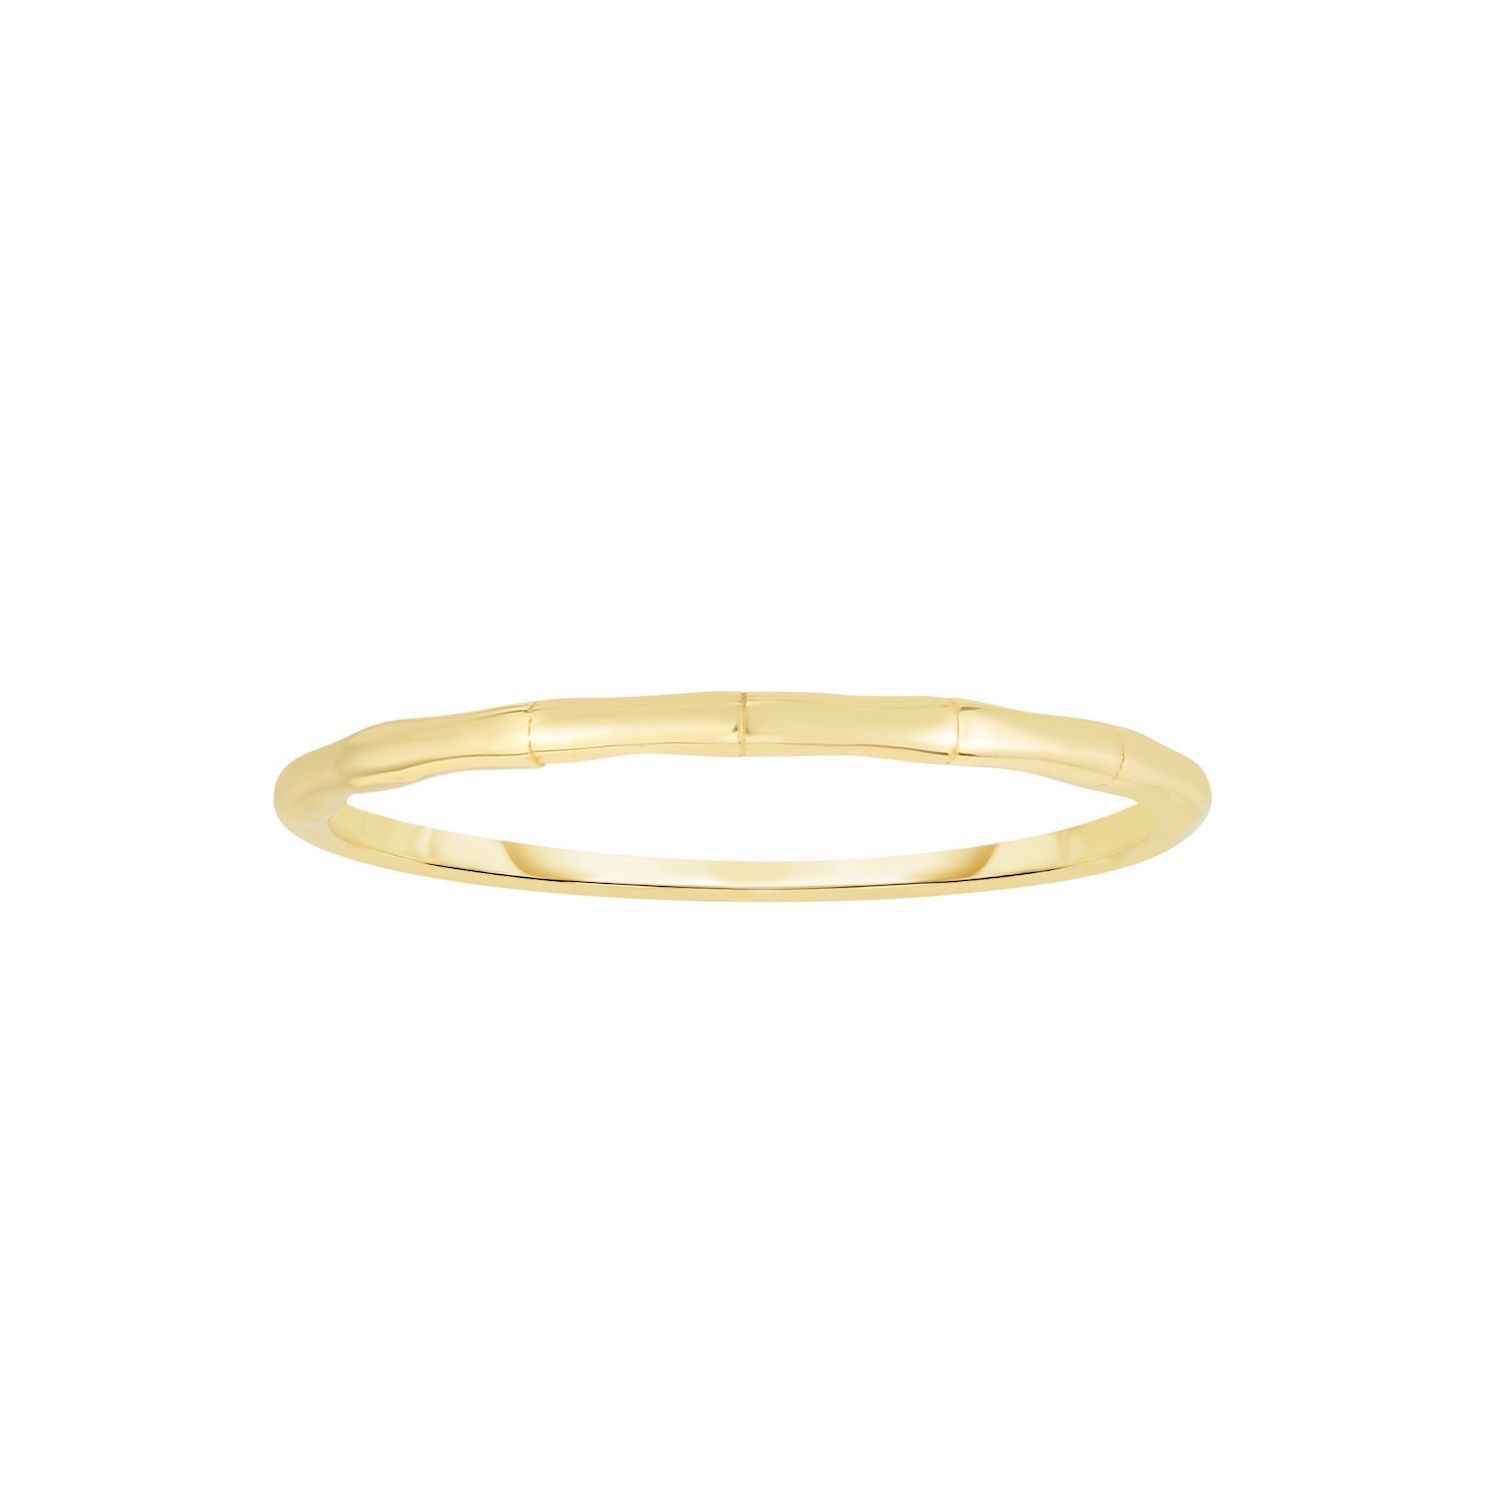 Solid 14K Yellow Gold 2.5mm Bamboo Design Band Stackable Band Ring